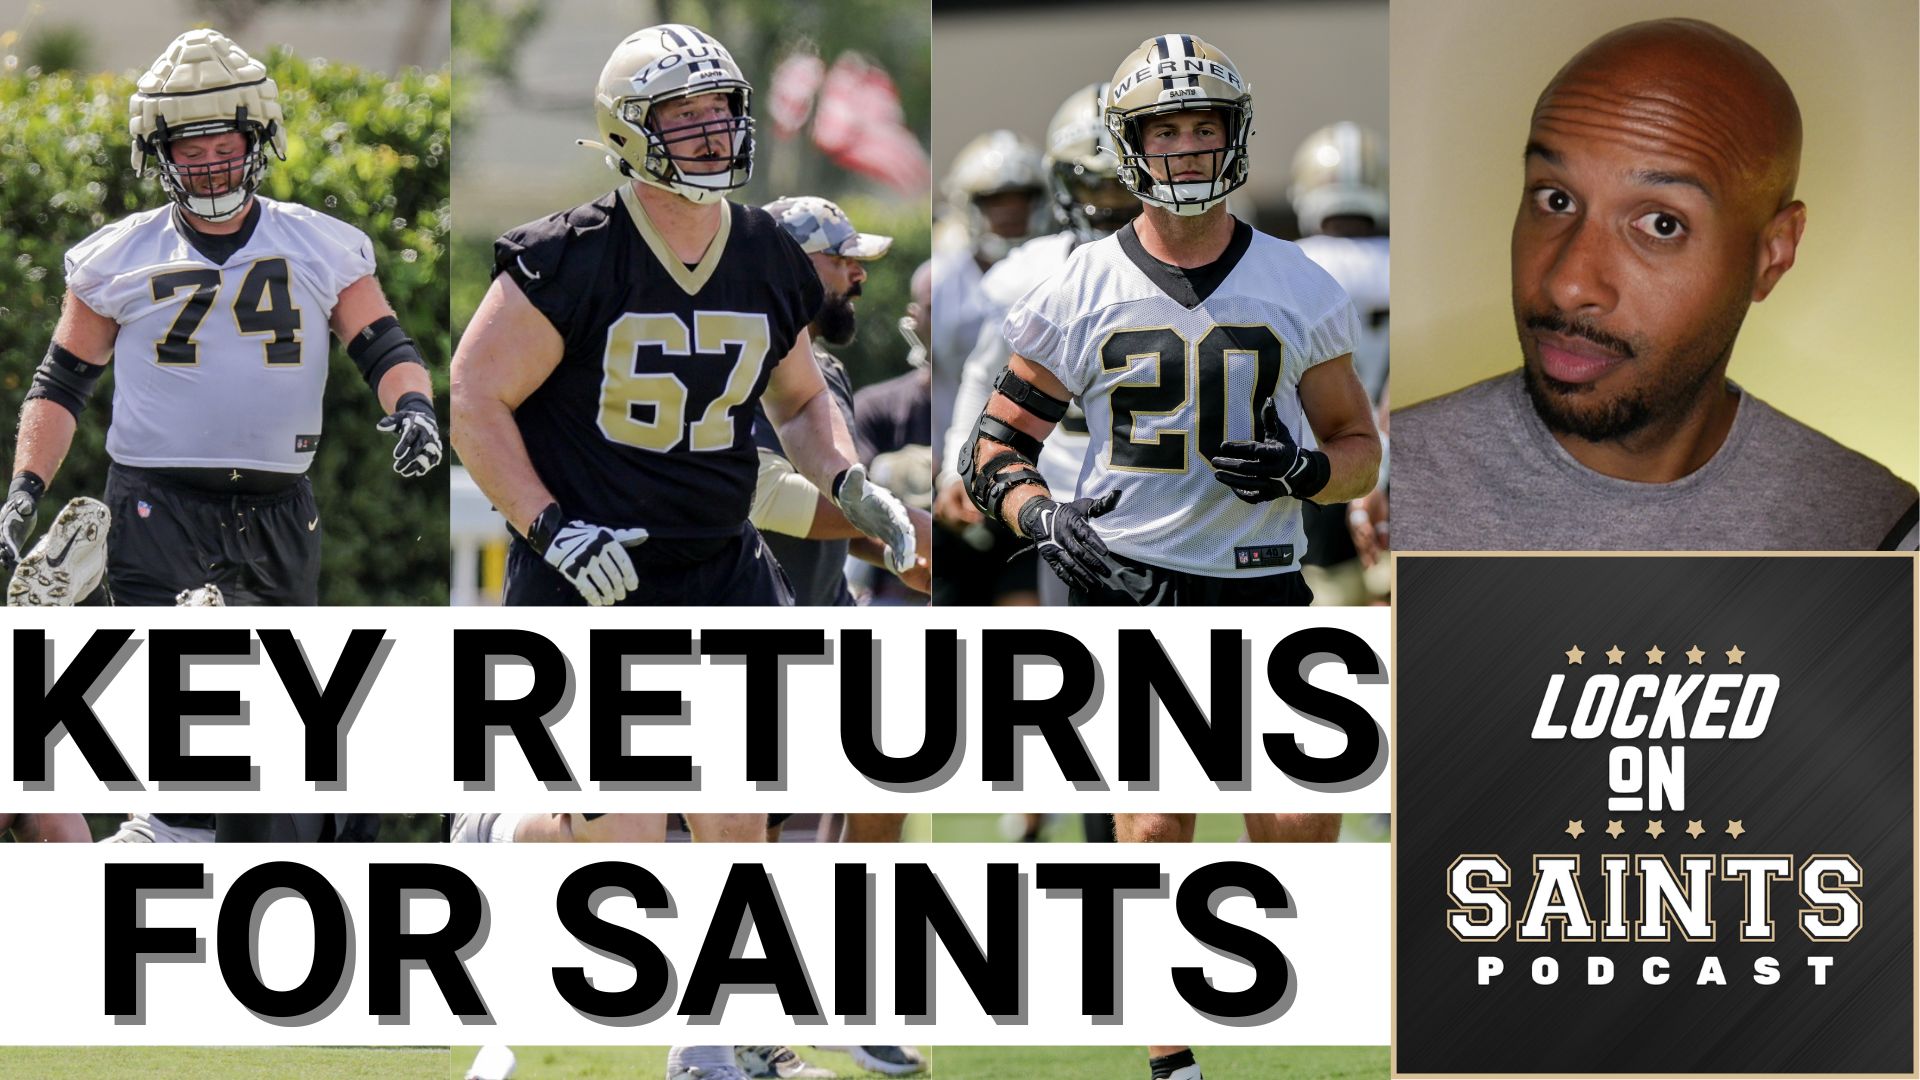 New Orleans Saints James Hurst, Pete Werner, and other key players return Monday